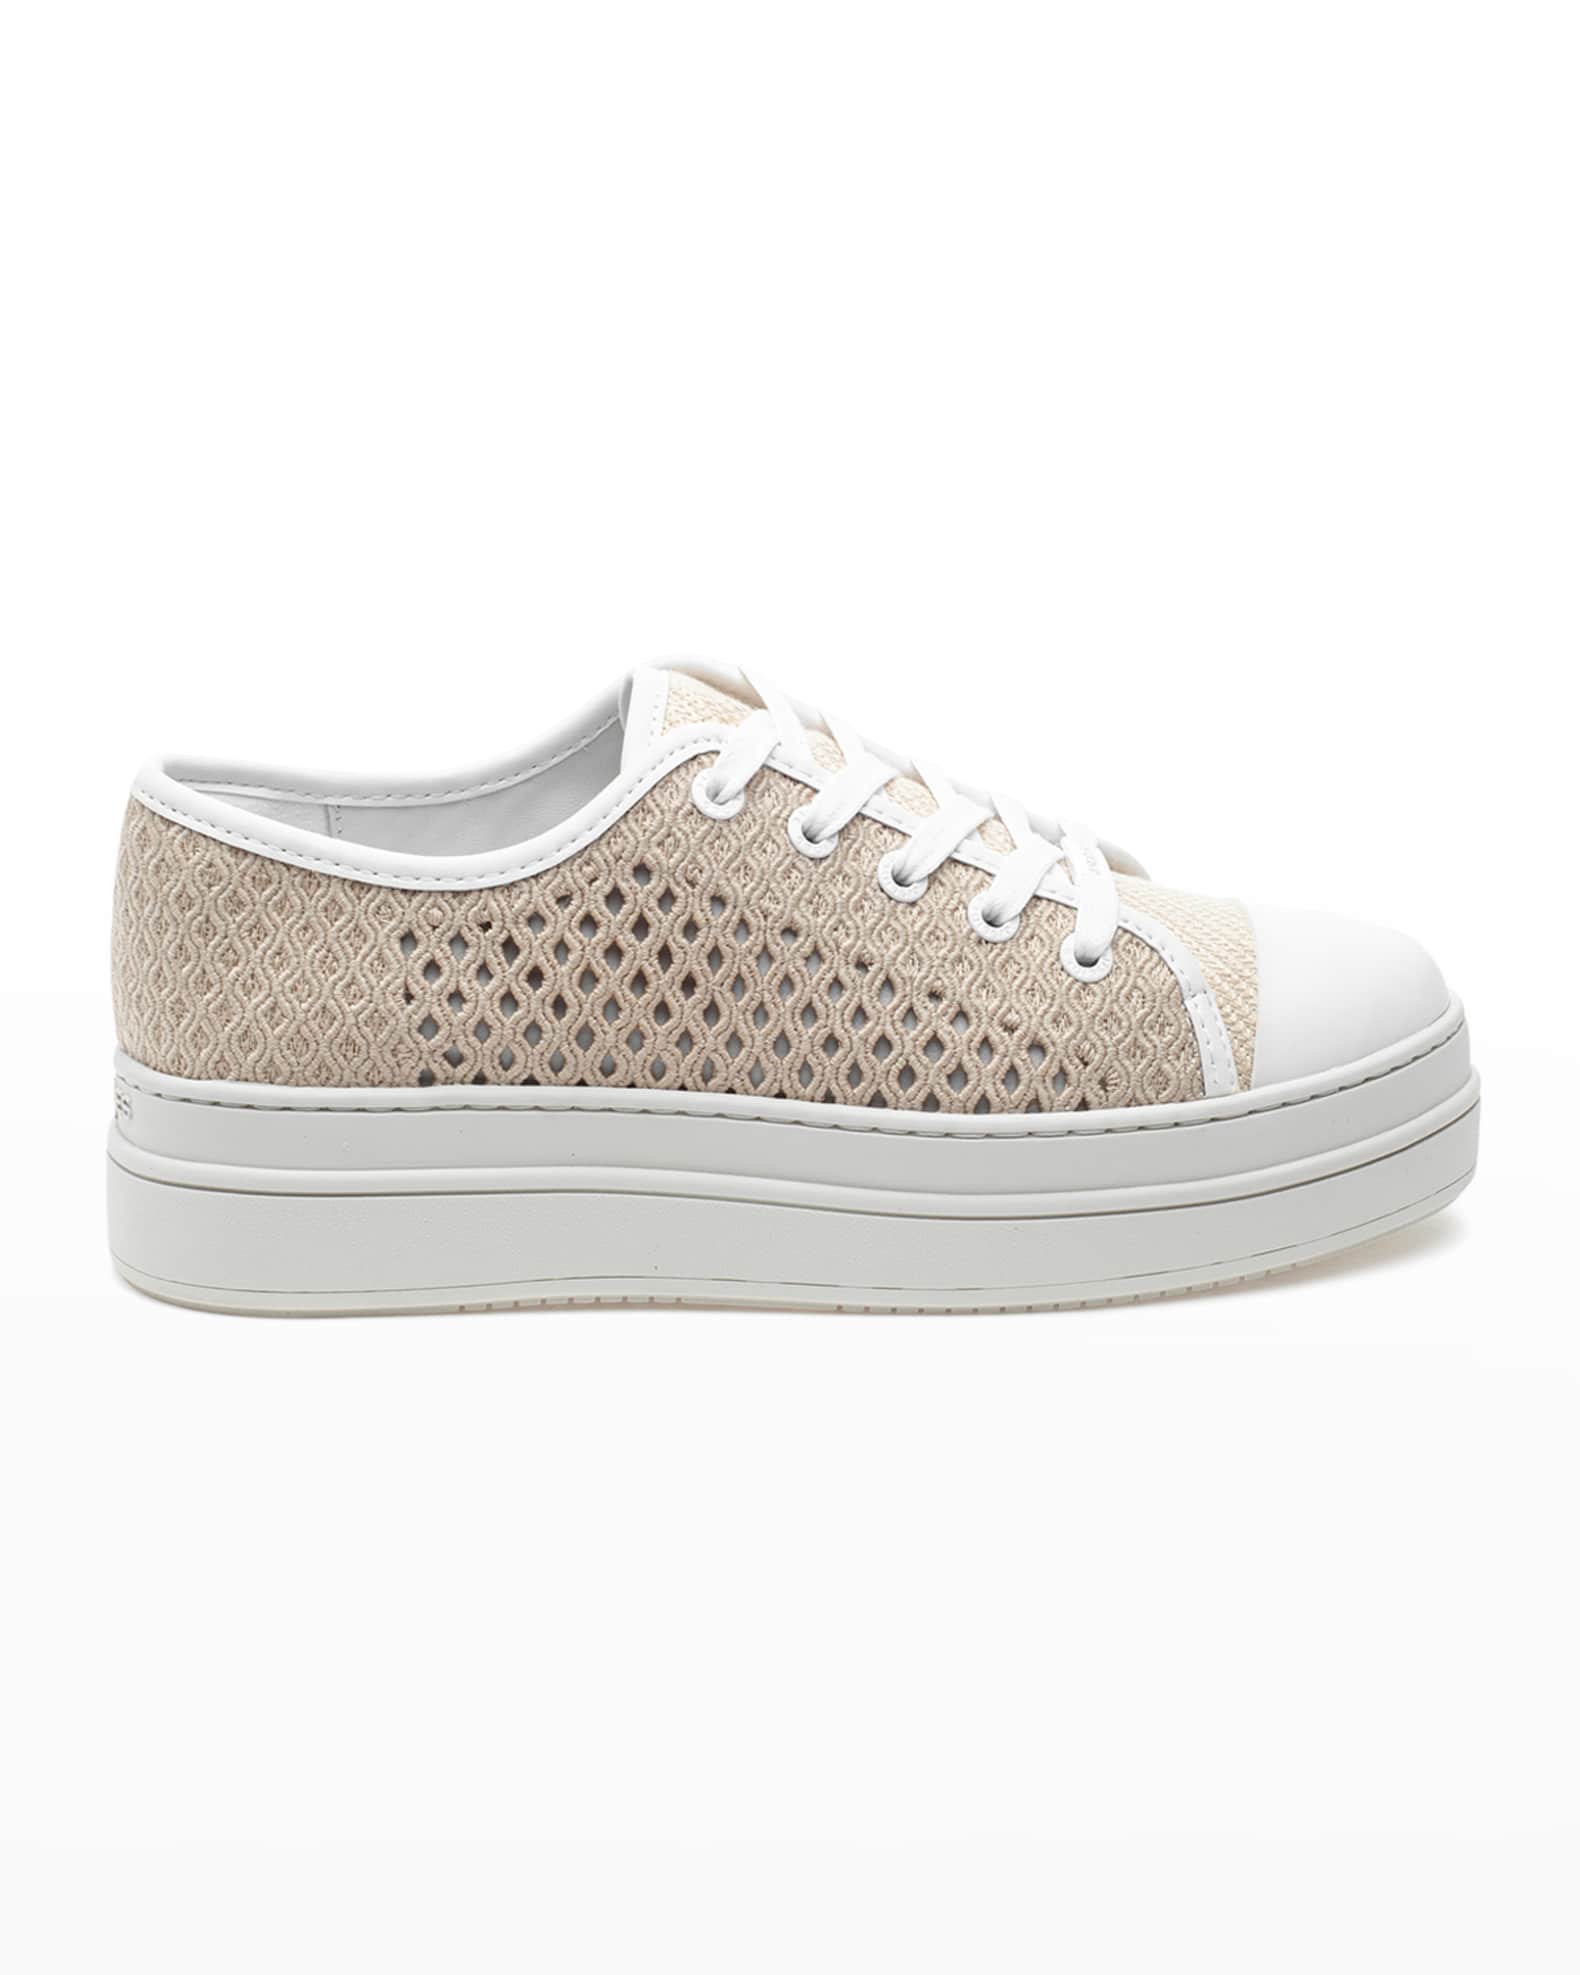 JSlides Natashsa Perforated Low-Top Sneakers | Neiman Marcus